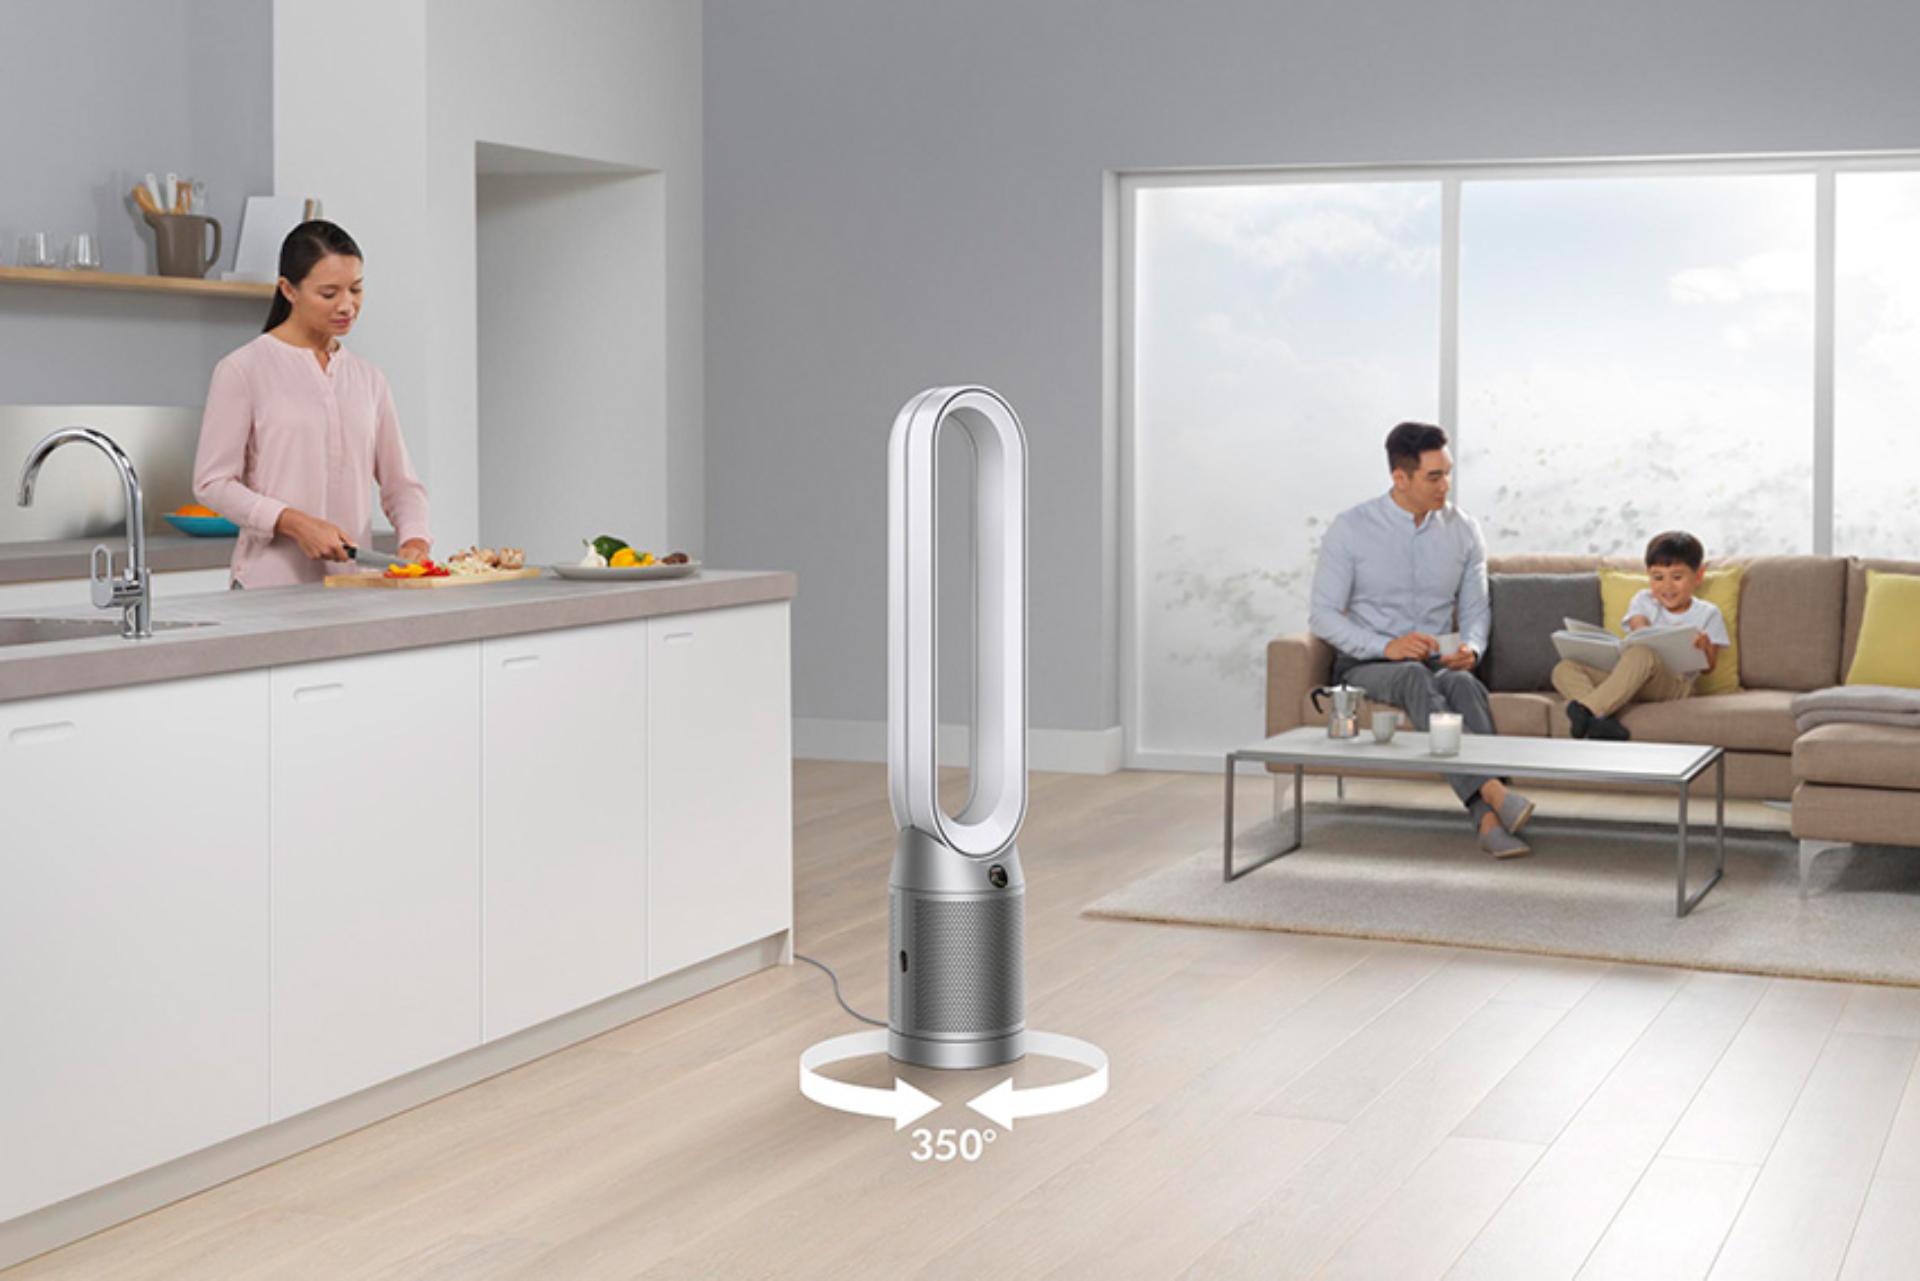 Dyson purifiers keepinghouse cool in summer